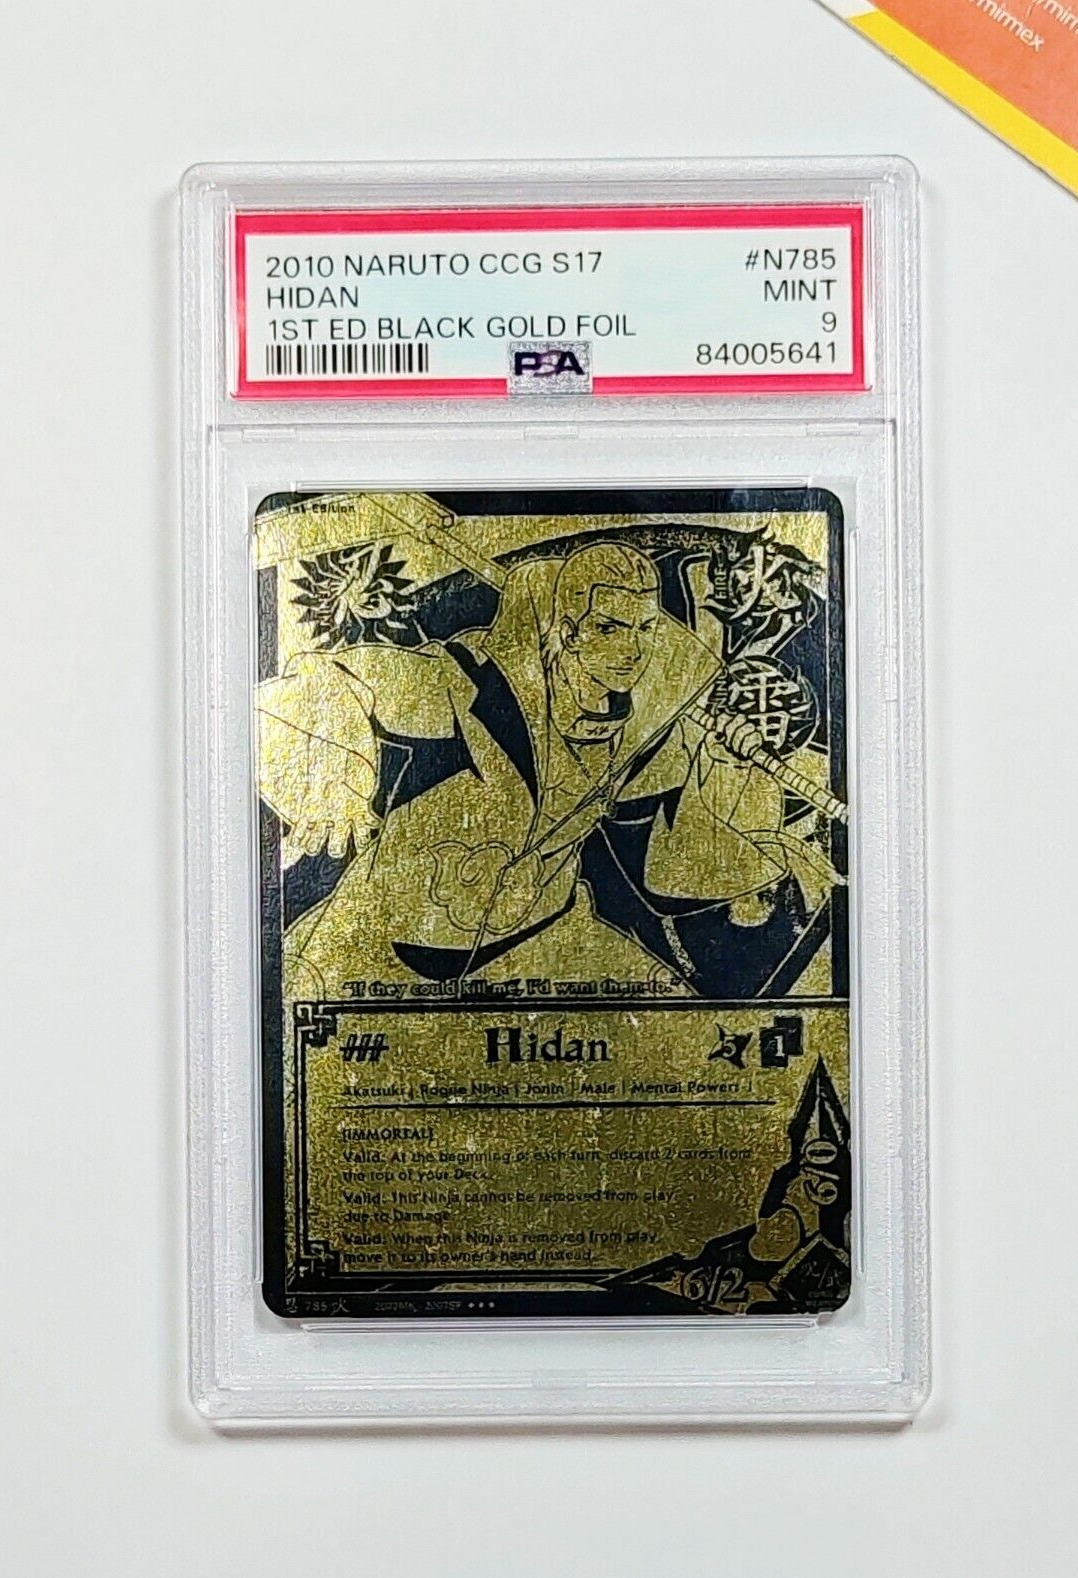 2010 Naruto PSA 9 Hidan #N785 1st Edition Black Gold Foil Will Of Fire Japanese